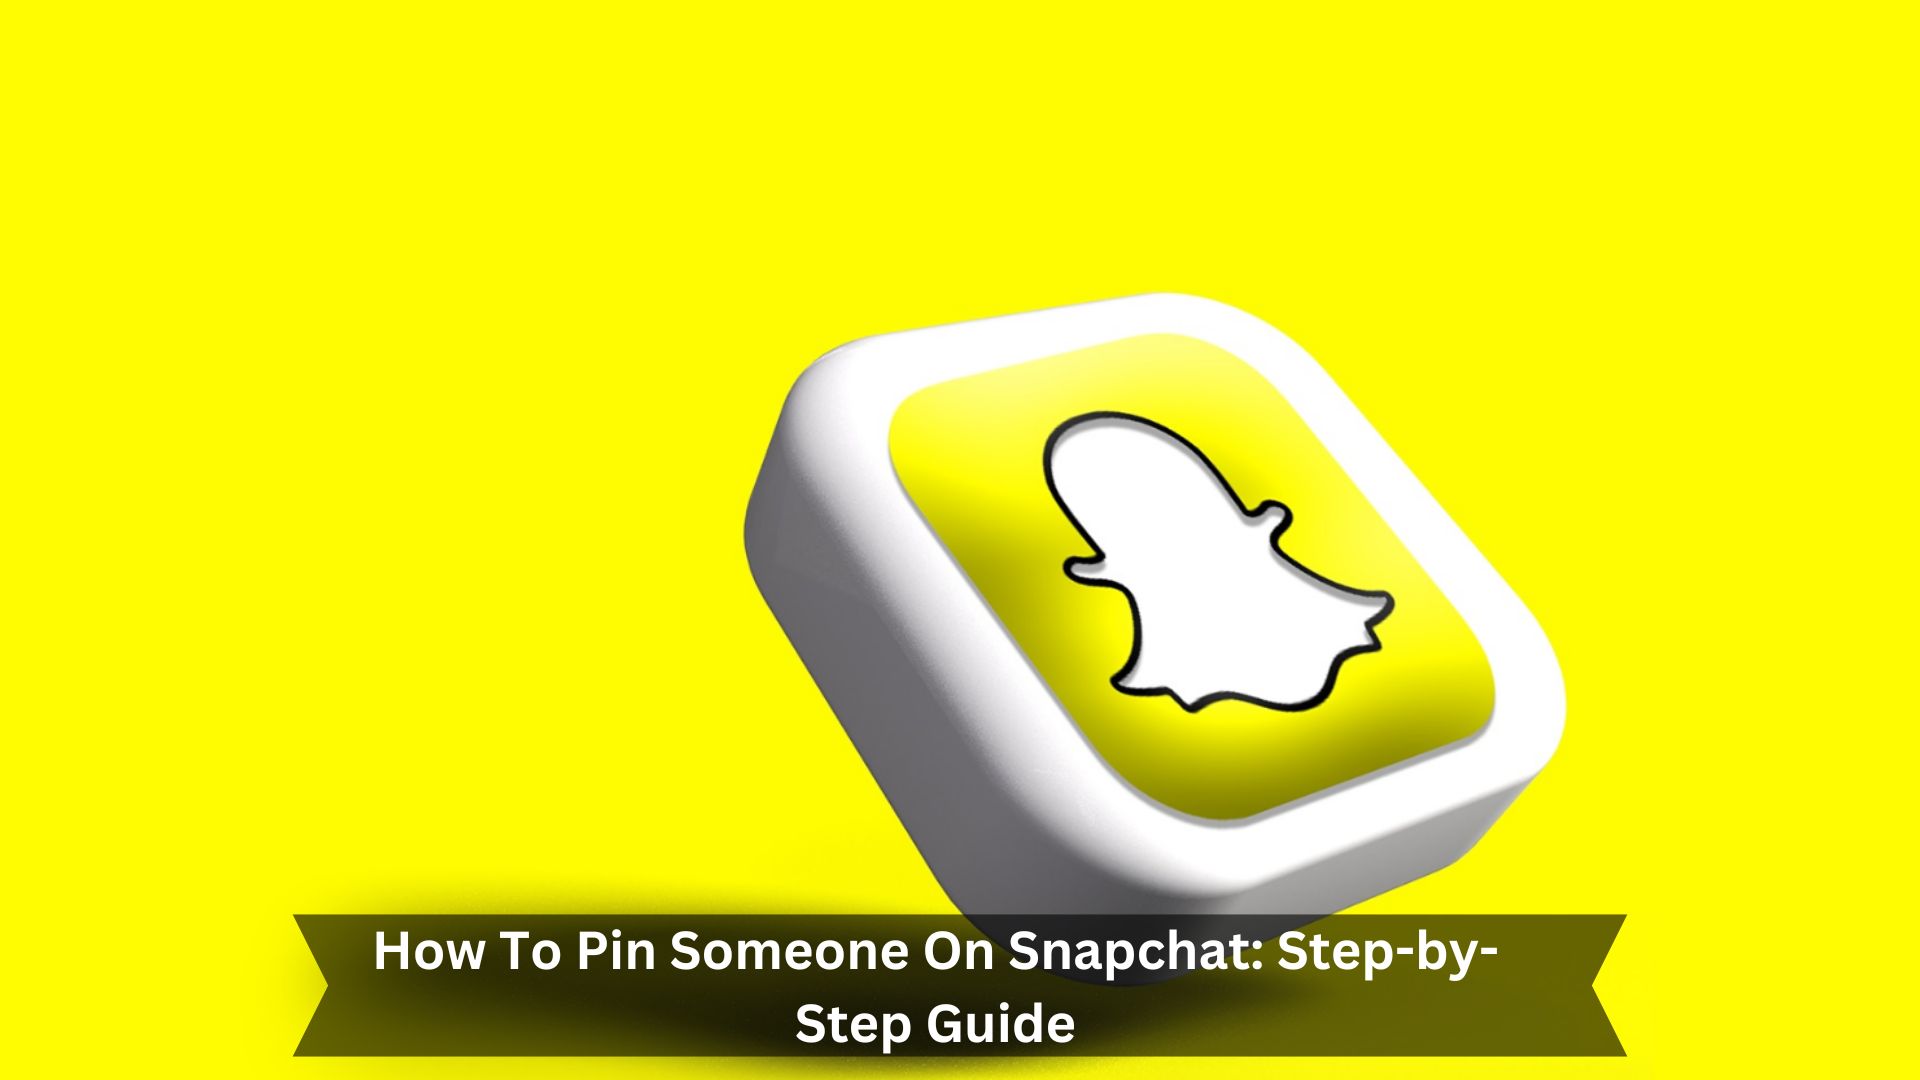 How-To-Pin-Someone-On-Snapchat-Step-by-Step-Guide